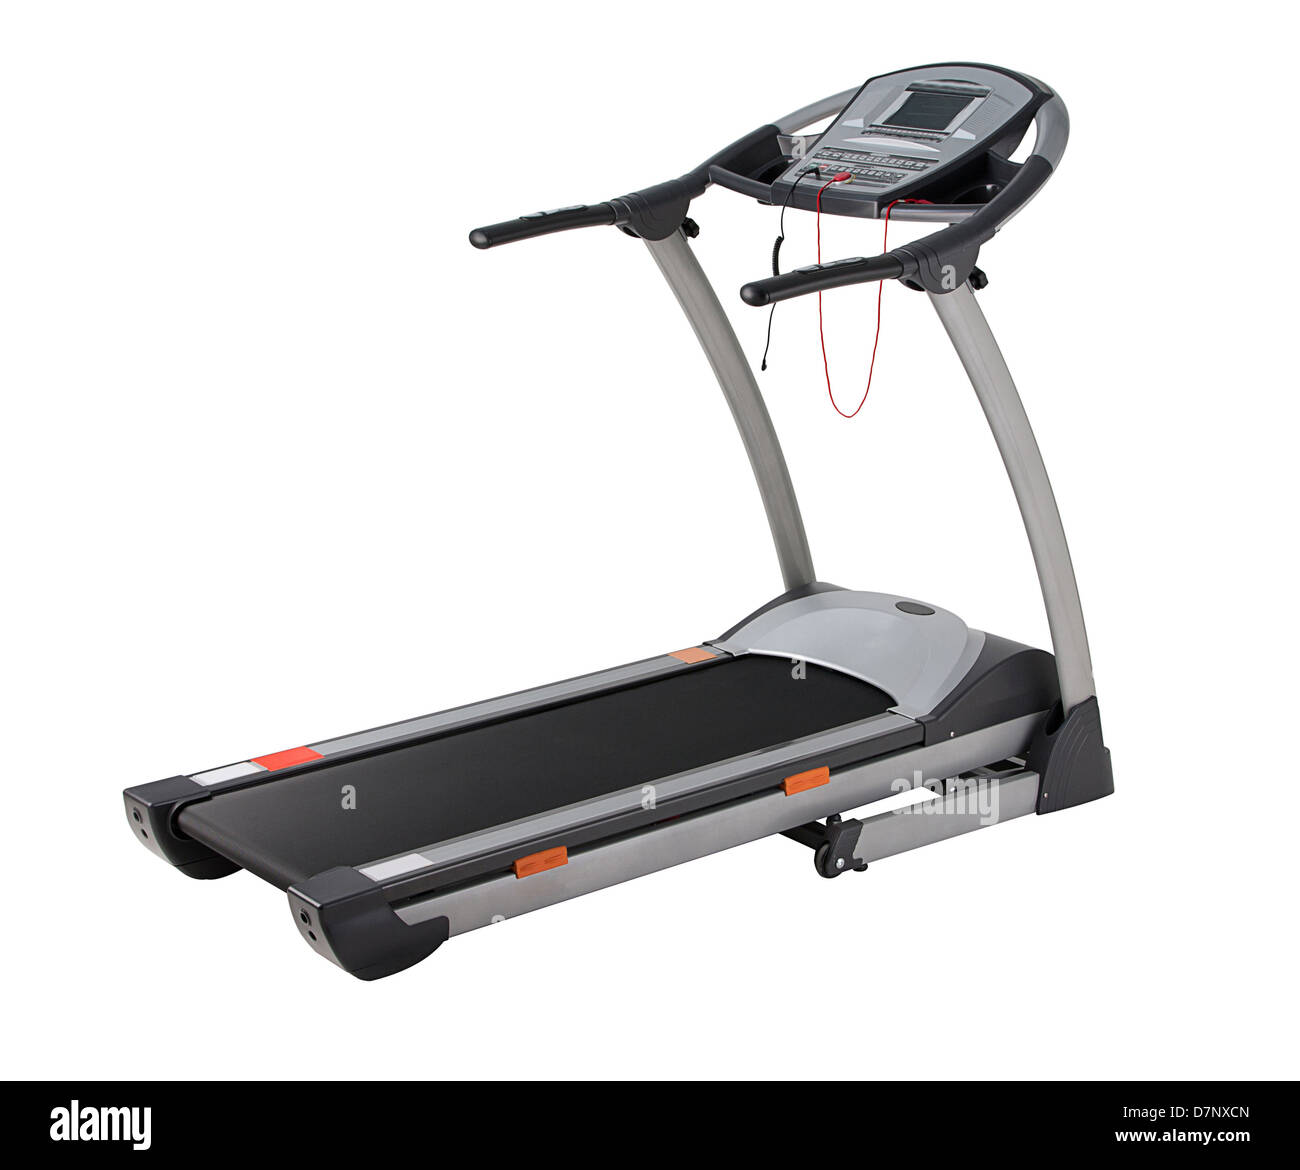 treadmill the exercise equipment isolated on white background Stock Photo